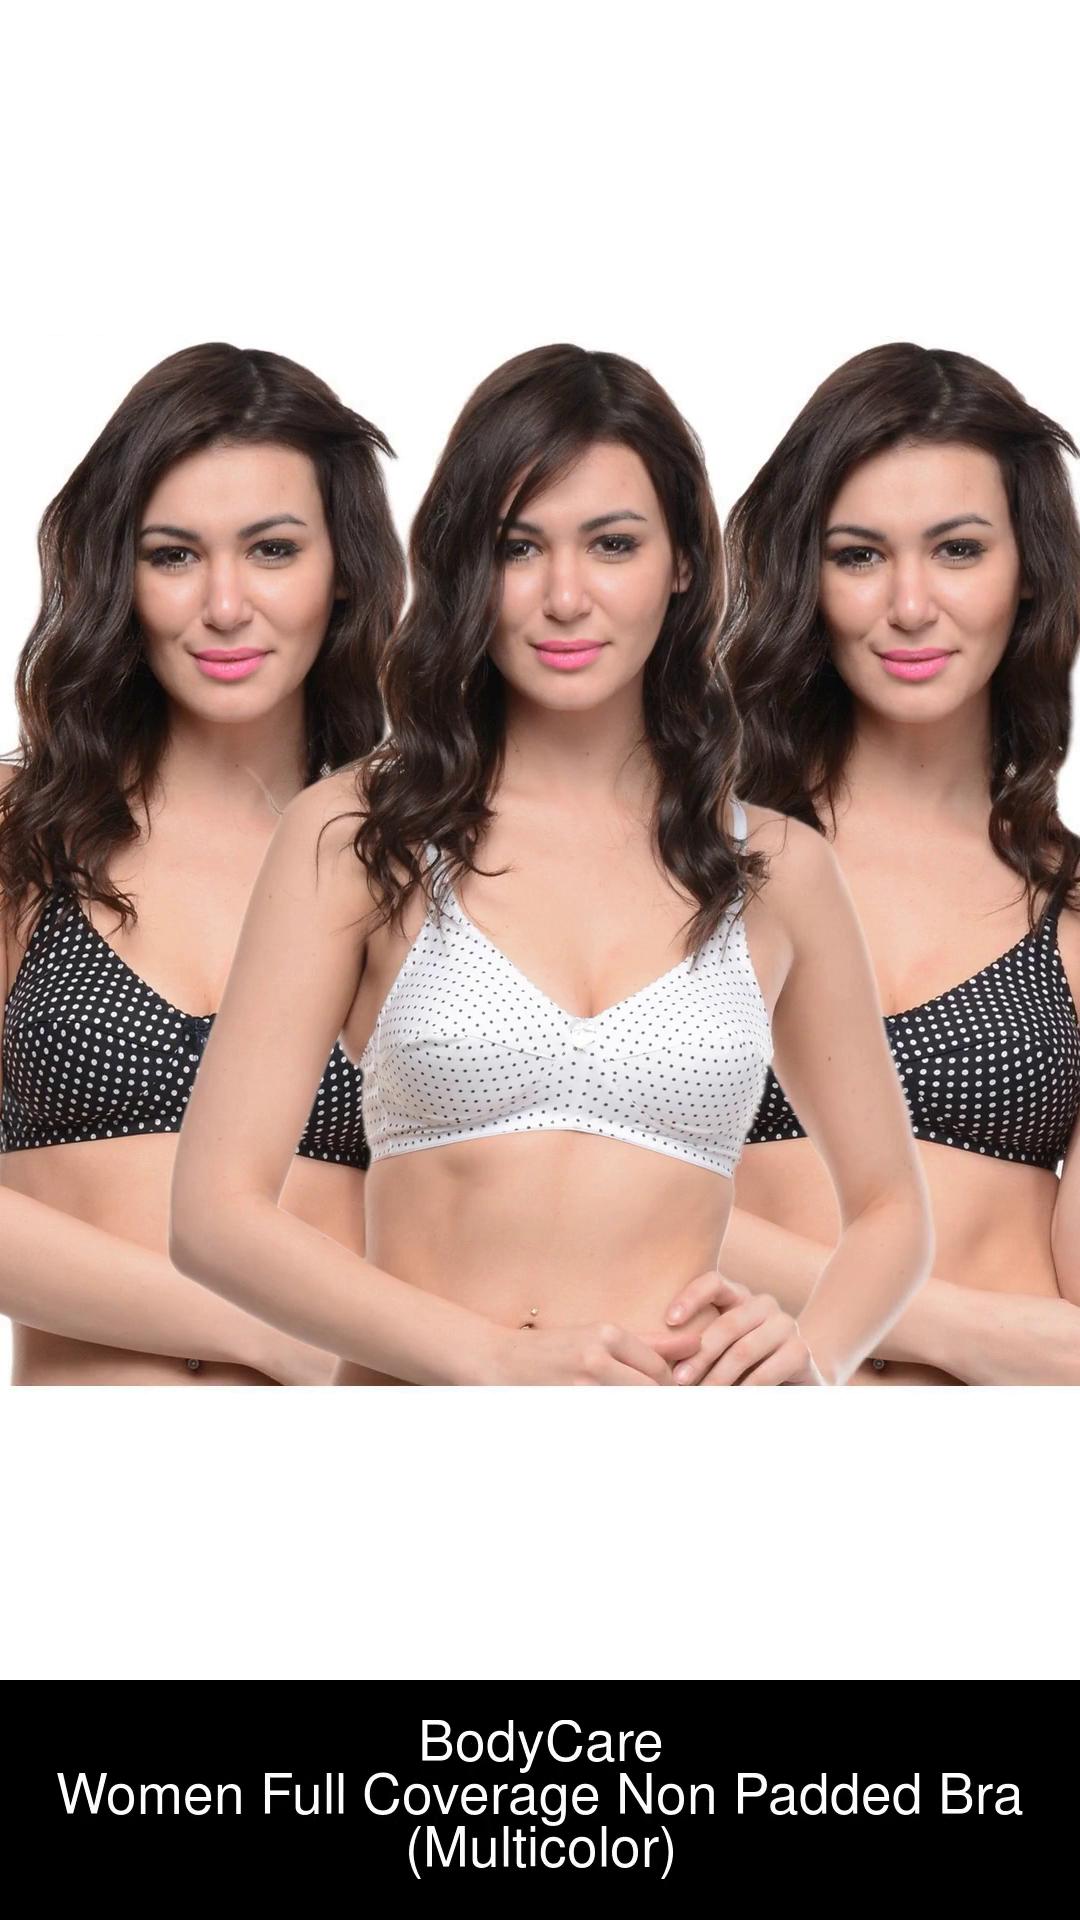 Bodycare 44B Size Bras in Kohima - Dealers, Manufacturers & Suppliers -  Justdial